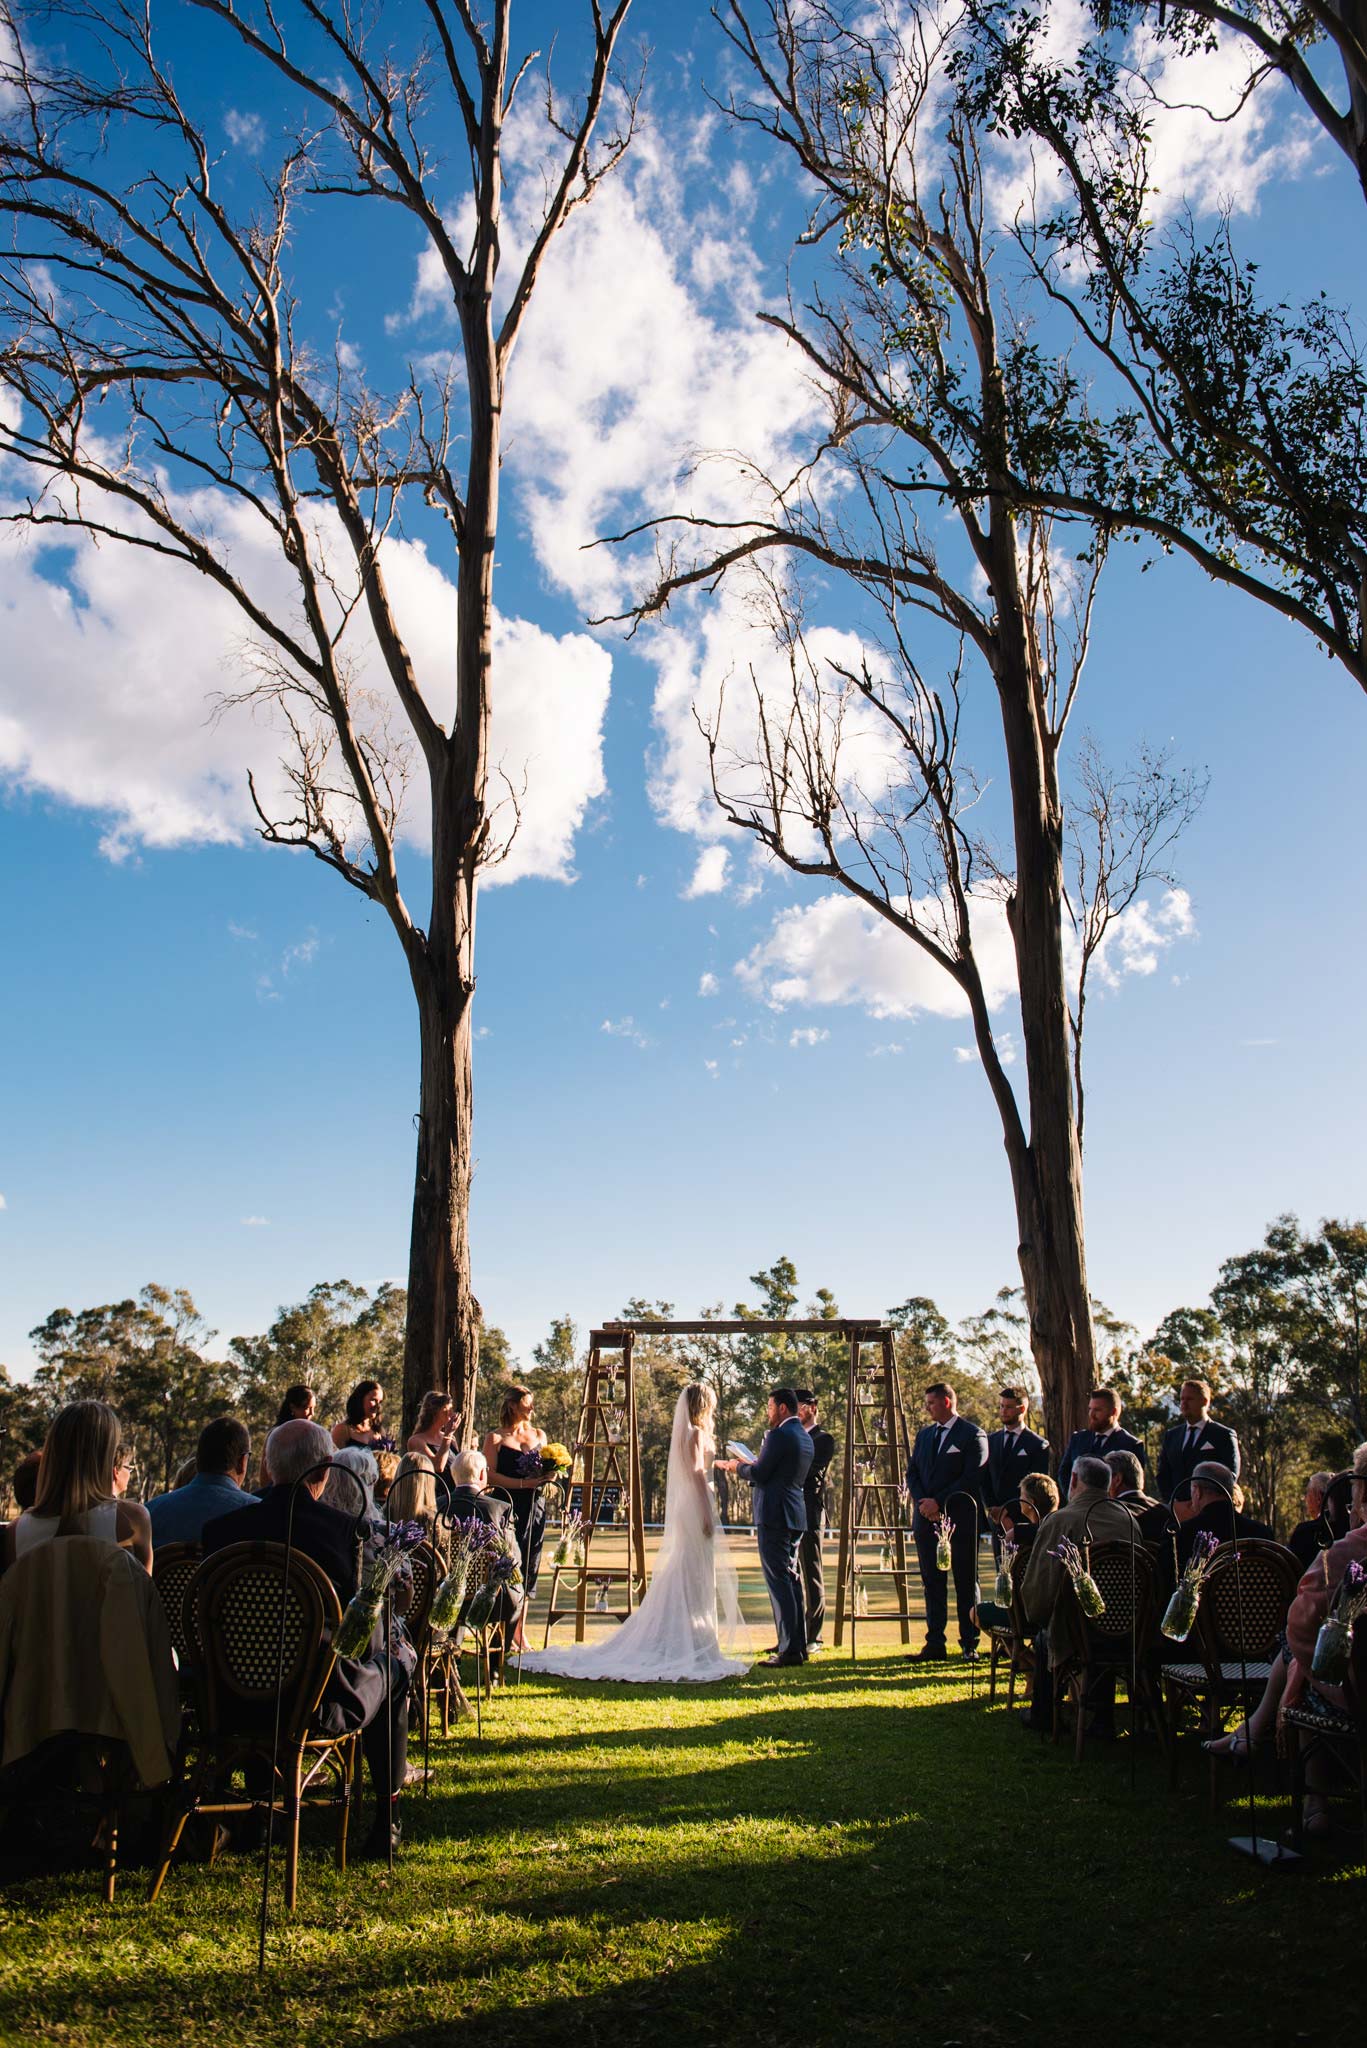 View of wedding ceremony at Wandin Valley Estate